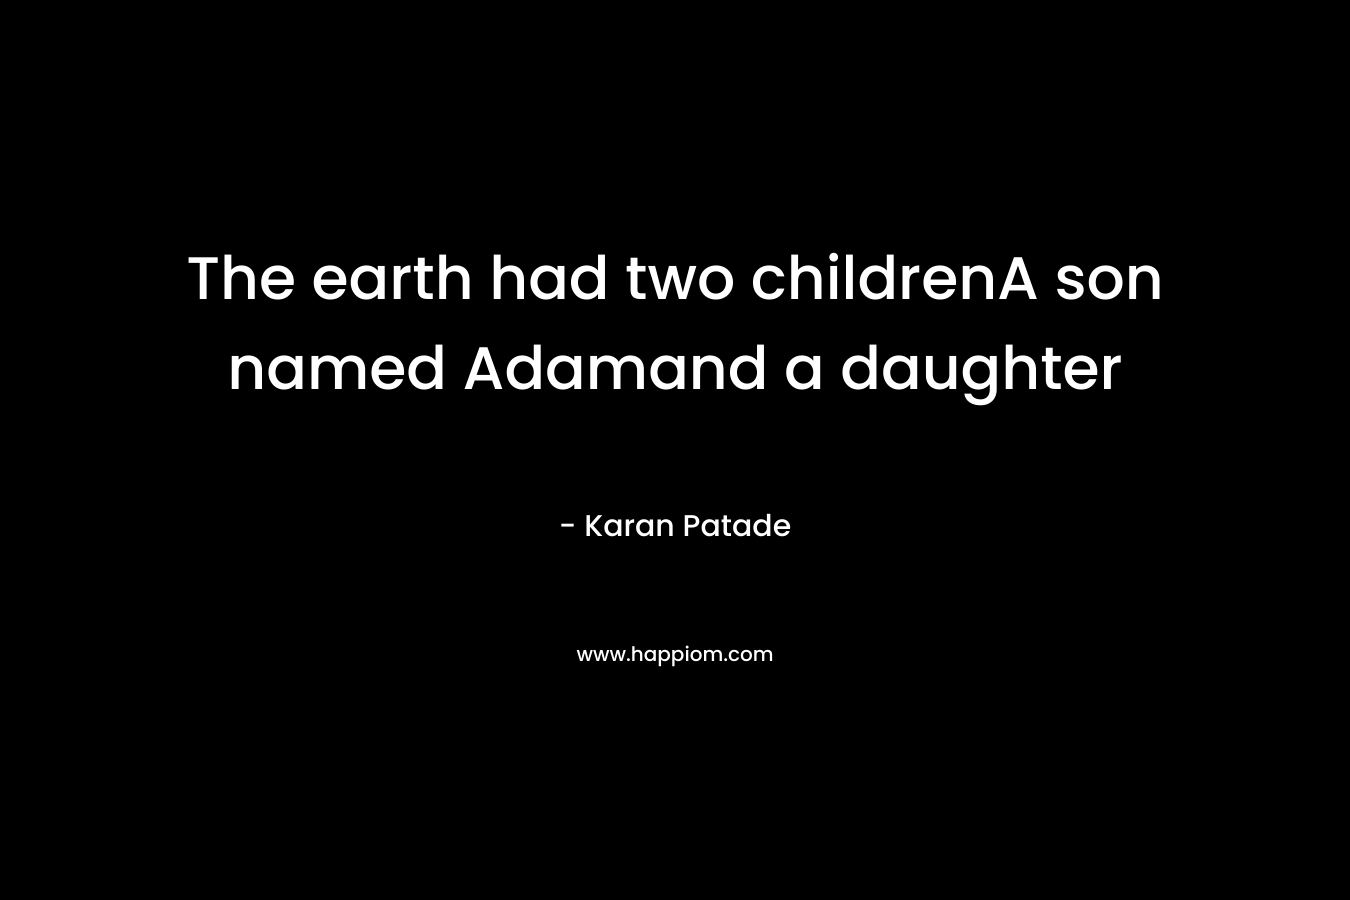 The earth had two childrenA son named Adamand a daughter